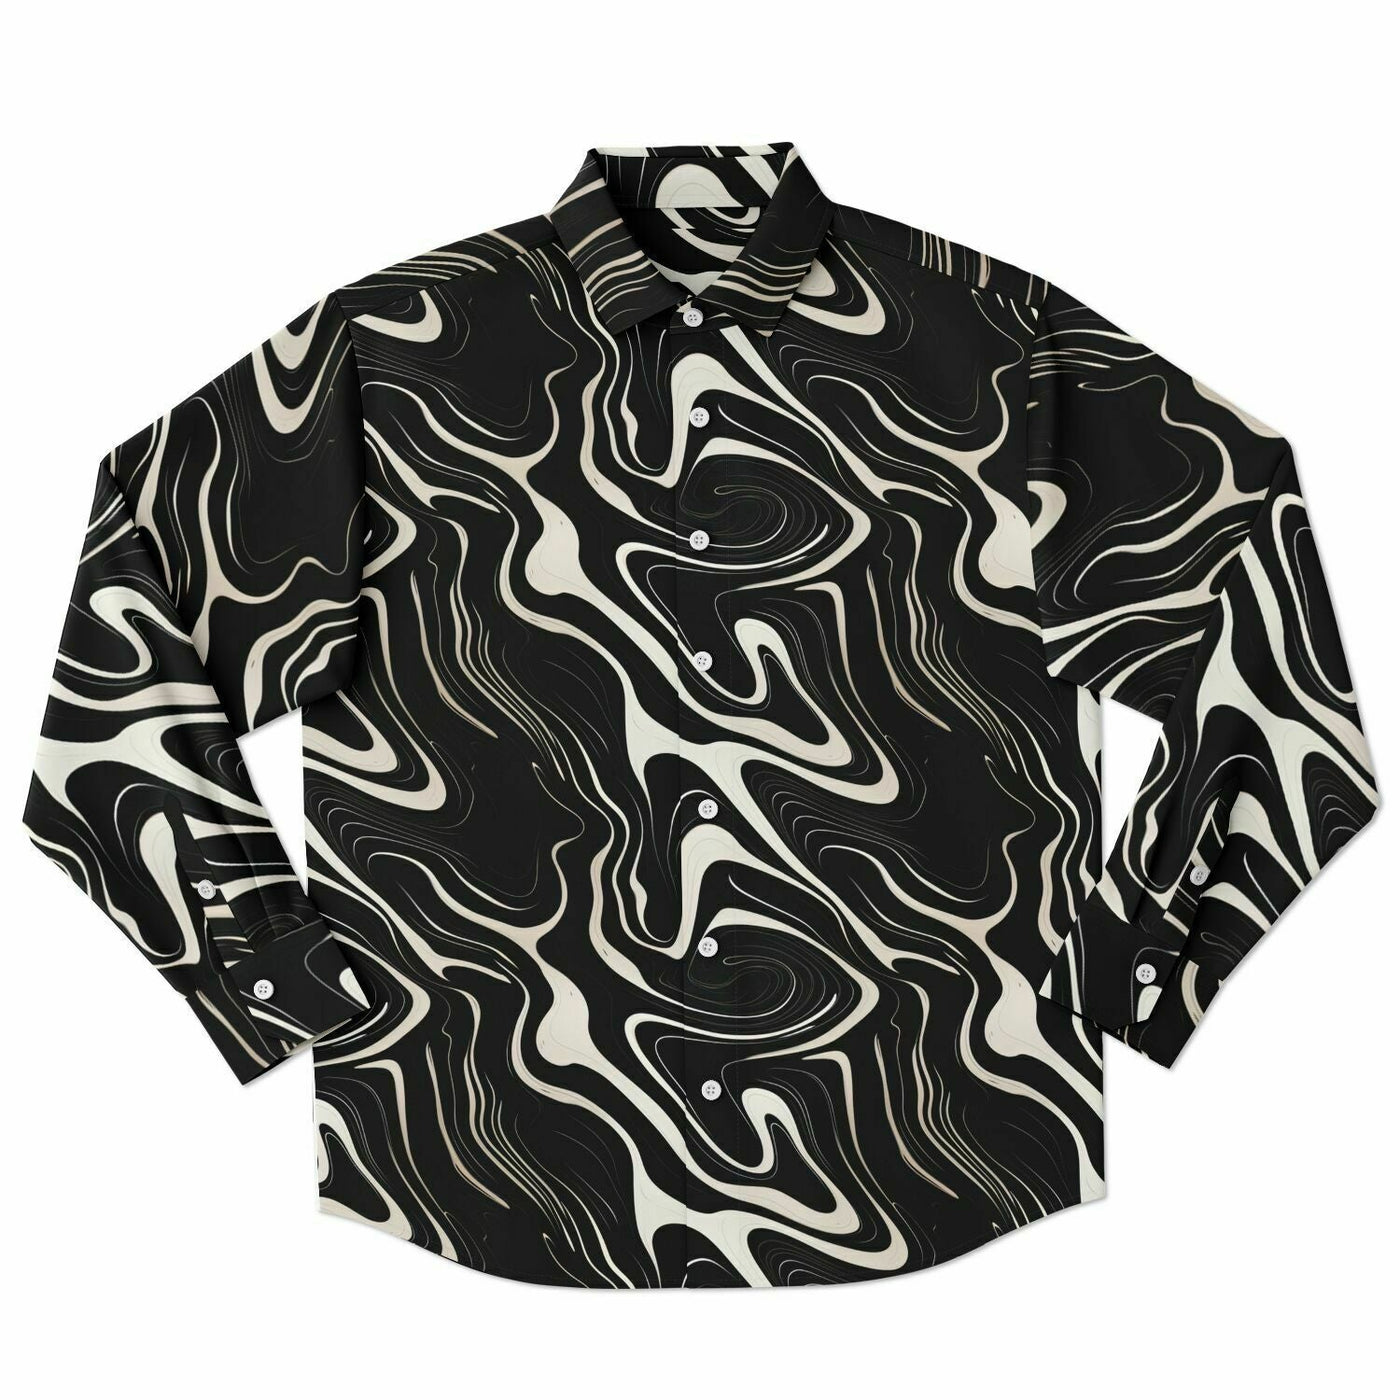 Wavy Black and White Abstract Pattern Long Sleeve Button Down Shirt